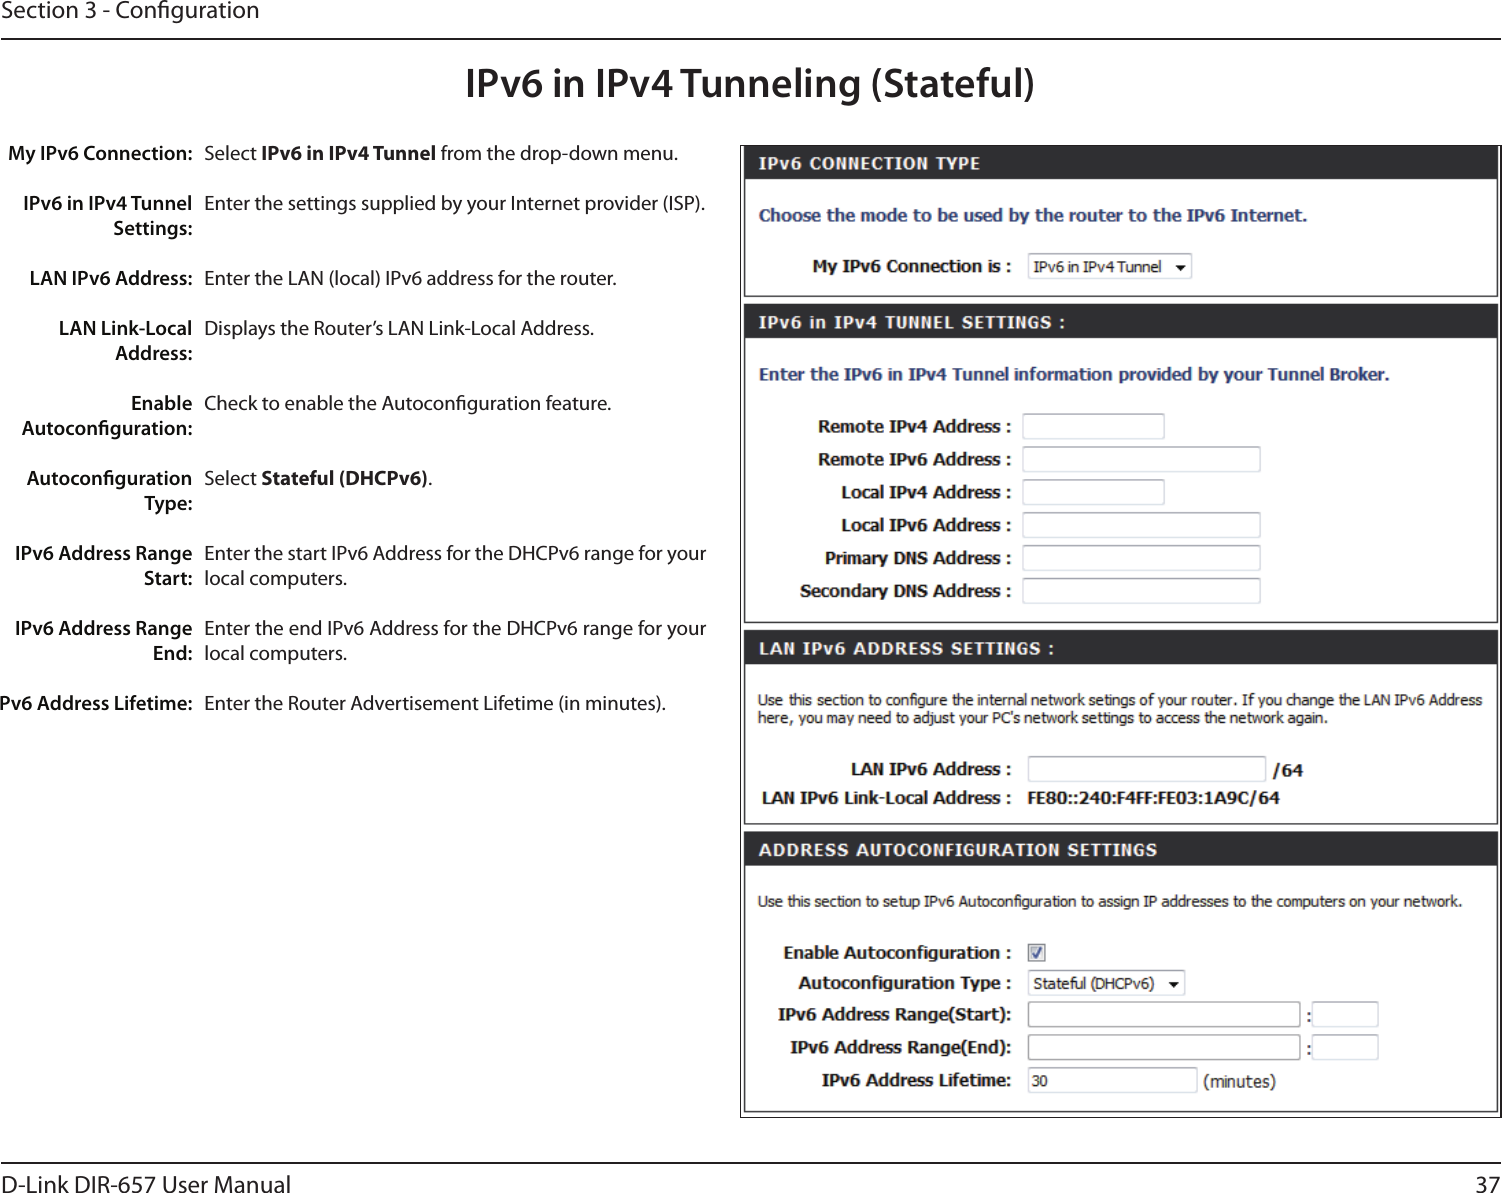 37D-Link DIR-657 User ManualSection 3 - CongurationIPv6 in IPv4 Tunneling (Stateful)Select IPv6 in IPv4 Tunnel from the drop-down menu.Enter the settings supplied by your Internet provider (ISP). Enter the LAN (local) IPv6 address for the router. Displays the Router’s LAN Link-Local Address.Check to enable the Autoconguration feature.Select Stateful (DHCPv6). Enter the start IPv6 Address for the DHCPv6 range for your local computers.Enter the end IPv6 Address for the DHCPv6 range for your local computers.Enter the Router Advertisement Lifetime (in minutes).My IPv6 Connection:IPv6 in IPv4 Tunnel Settings:LAN IPv6 Address:LAN Link-Local Address:Enable Autoconguration:Autoconguration Type:IPv6 Address Range Start:IPv6 Address Range End:Pv6 Address Lifetime: